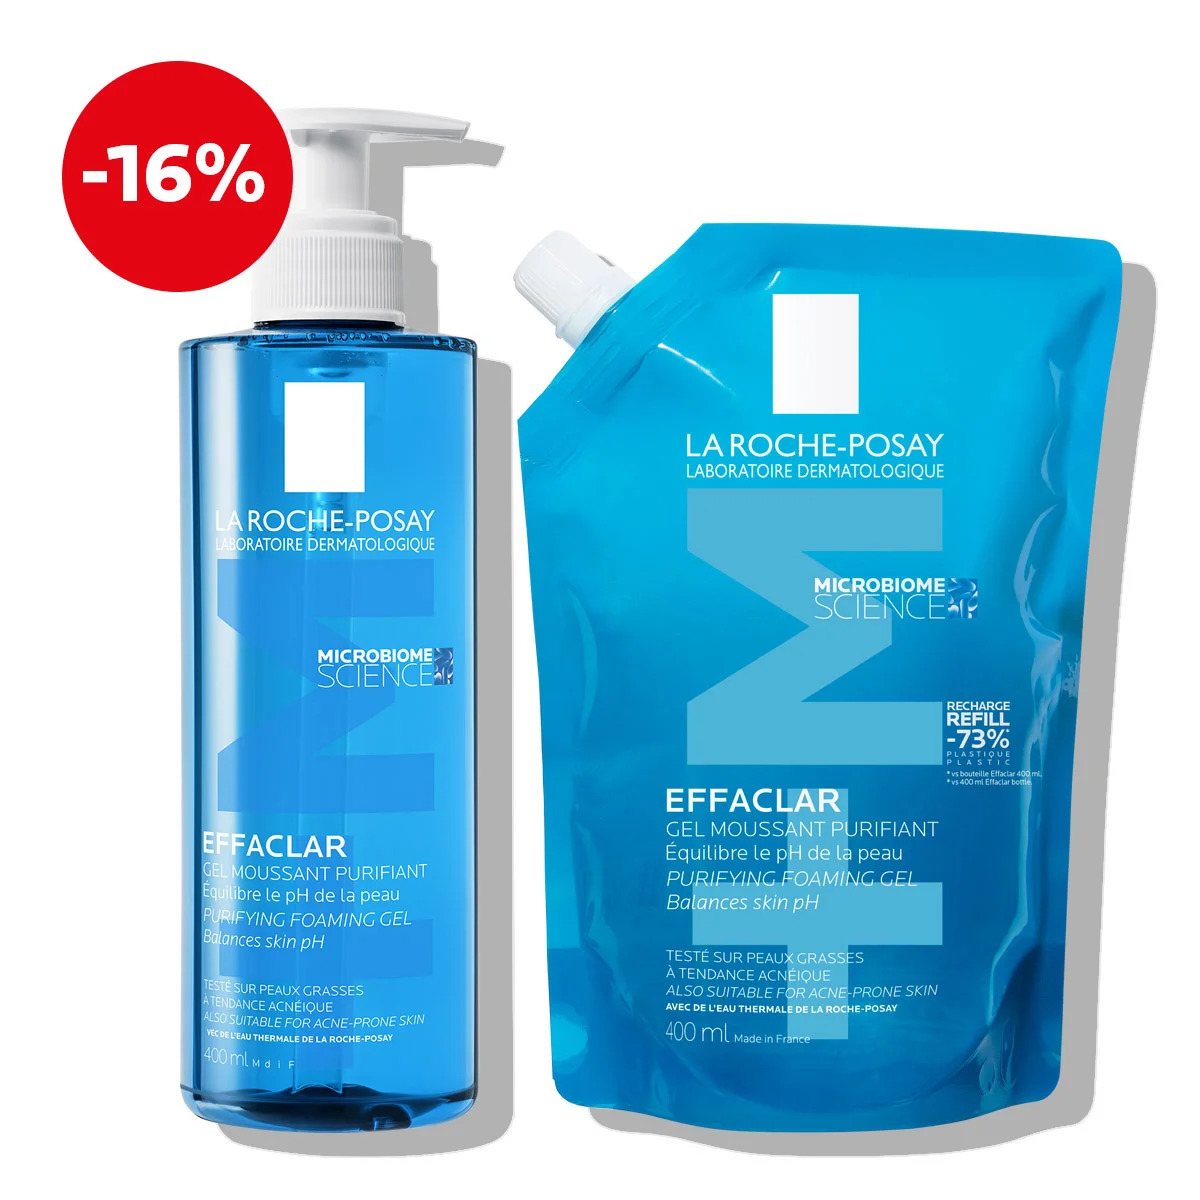 La Roche-Posay EFFACLAR Foaming gel + eco refill for skin prone to acne and irregularities (cleansing + refill) (1) (1)